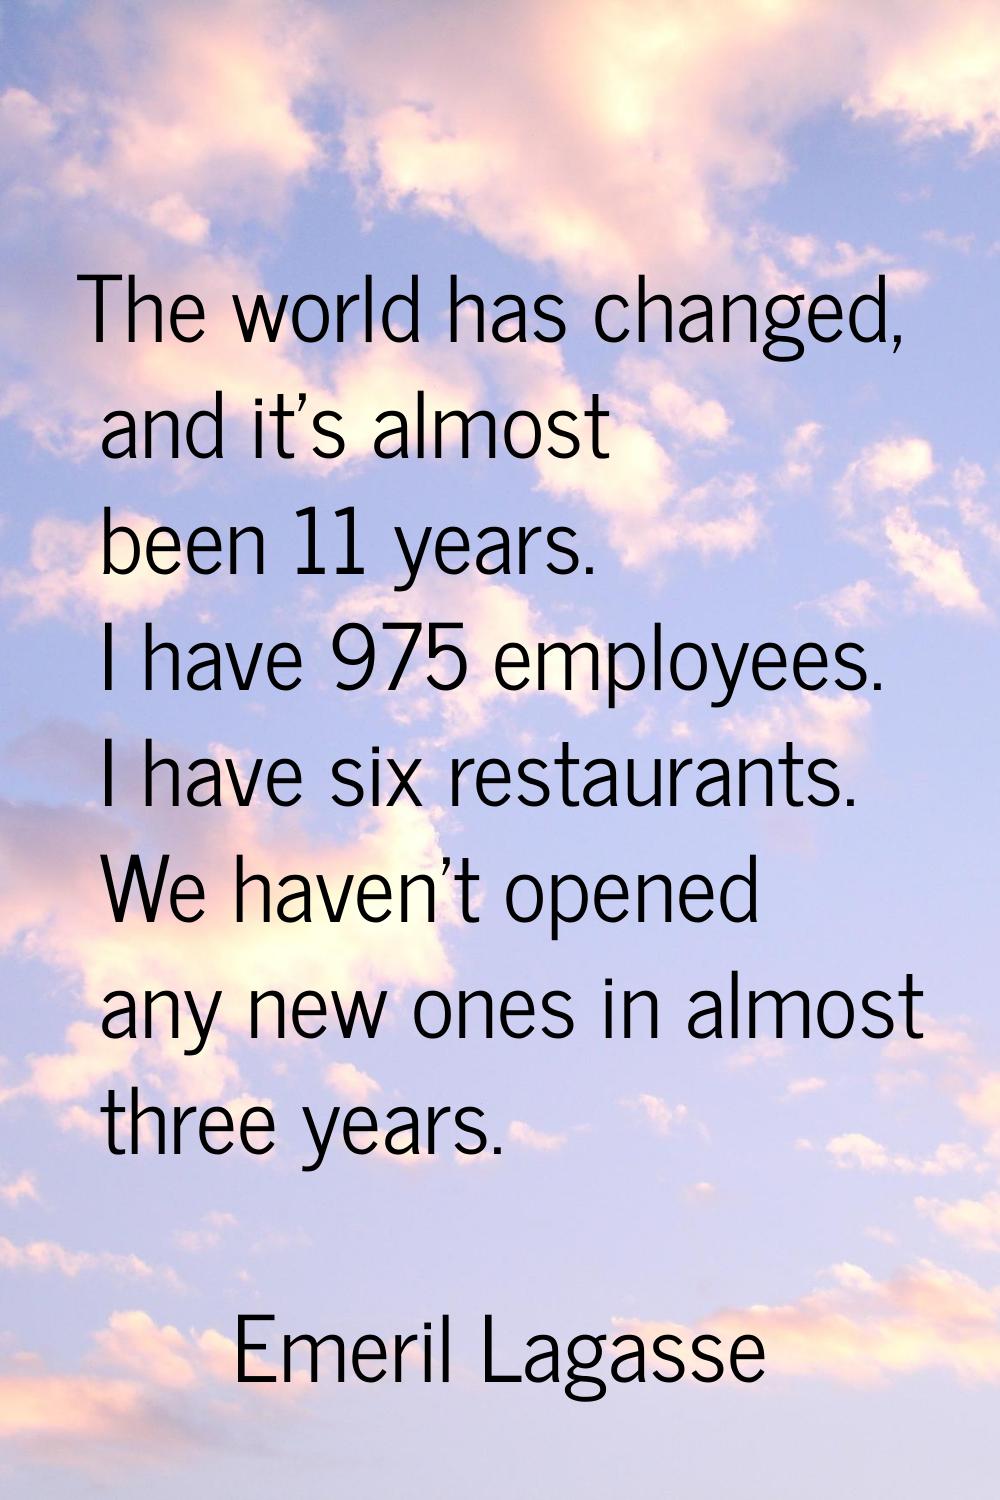 The world has changed, and it's almost been 11 years. I have 975 employees. I have six restaurants.